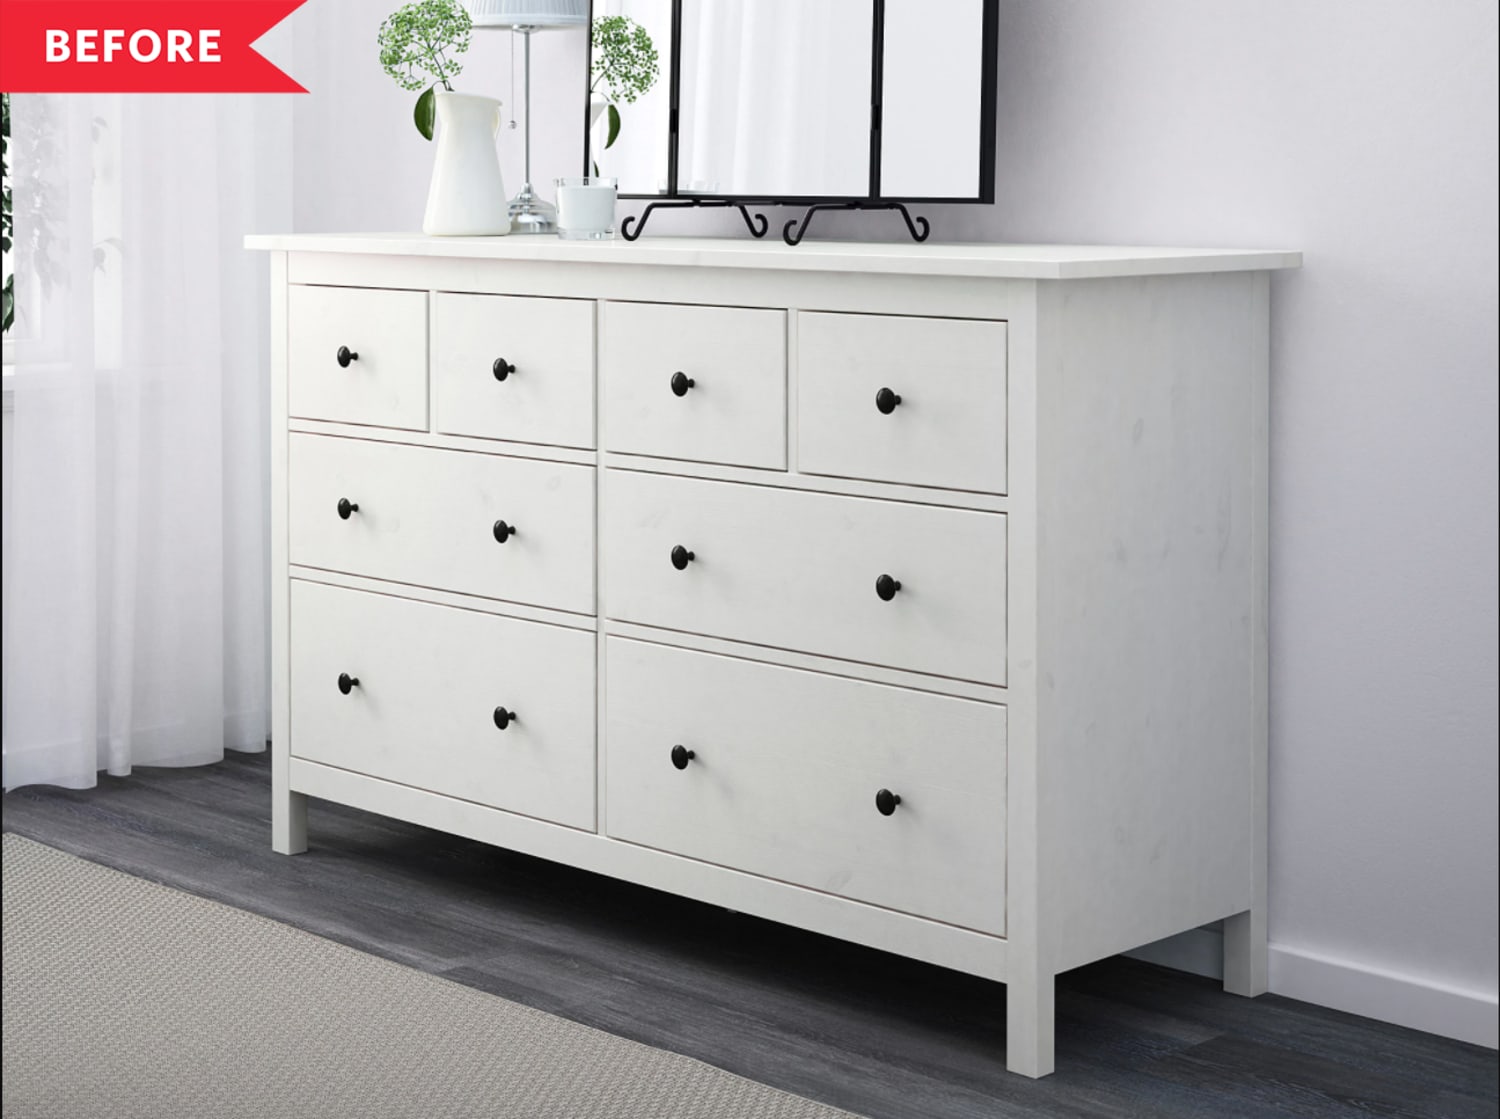 Before and After: This $40 IKEA HEMNES Dresser Flip Brightened up a Whole Bedroom